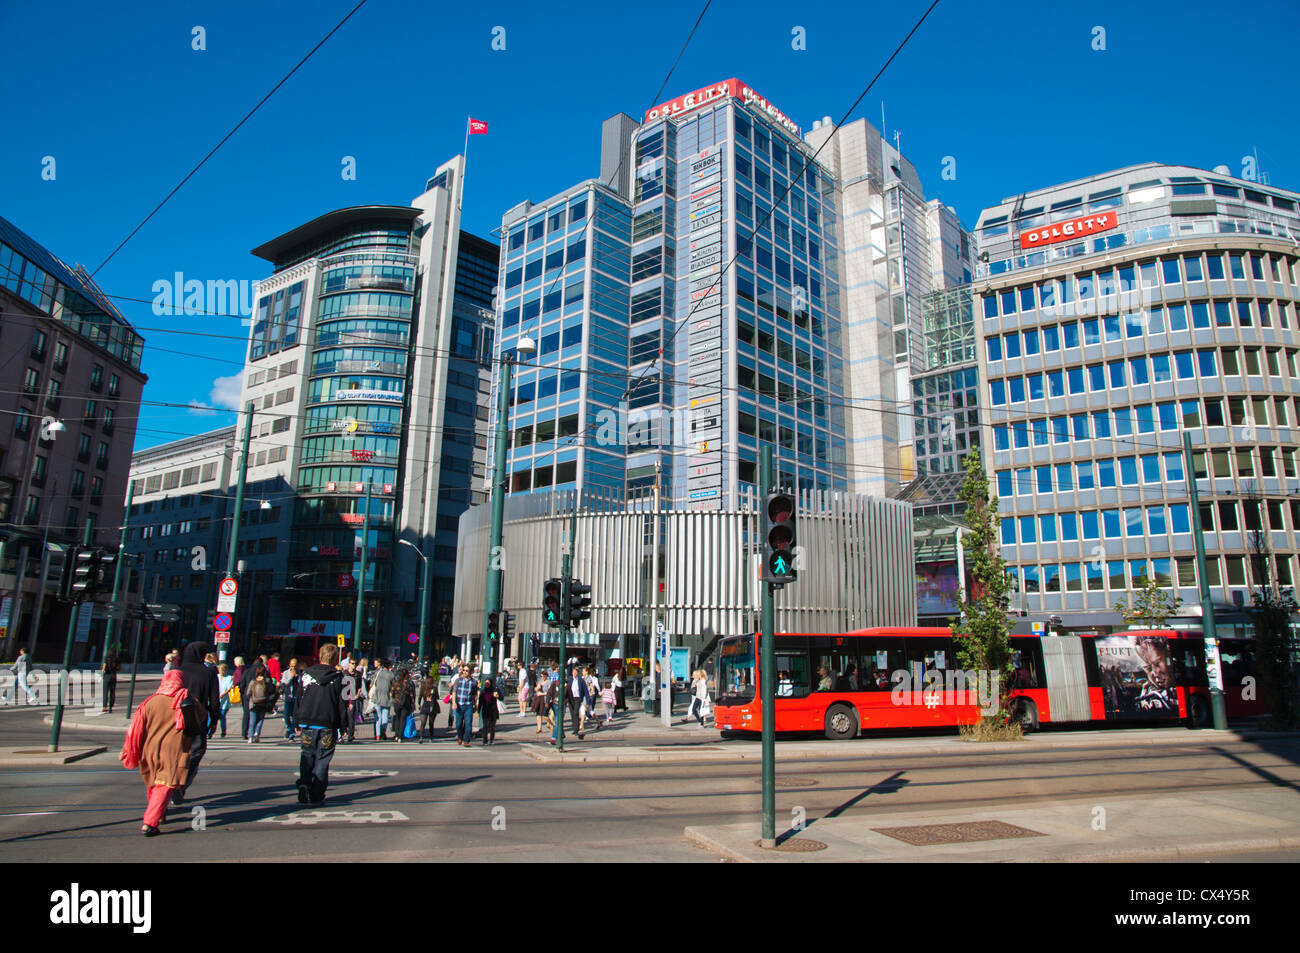 Oslo City Shopping Center High Resolution Stock Photography and Images -  Alamy